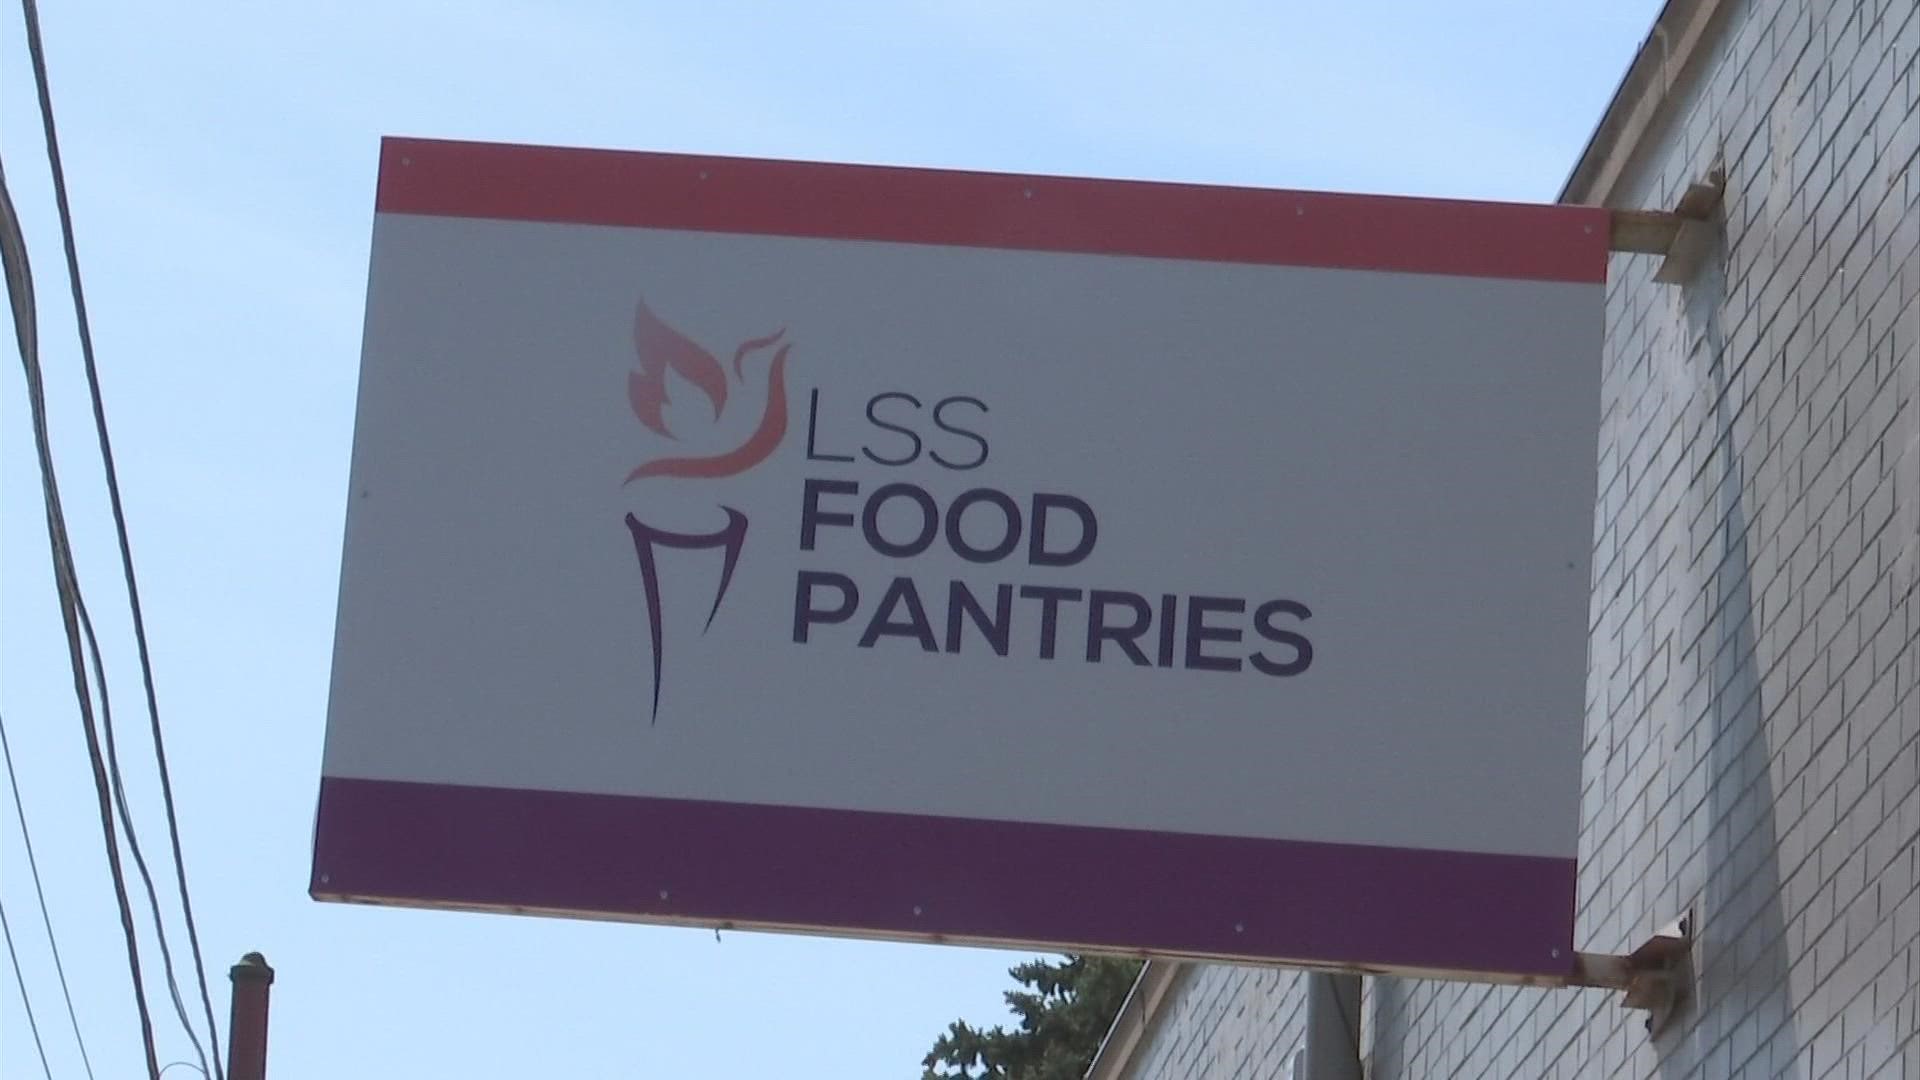 The LSS food pantry said it's seen a 48% increase of people compared to April 2021.